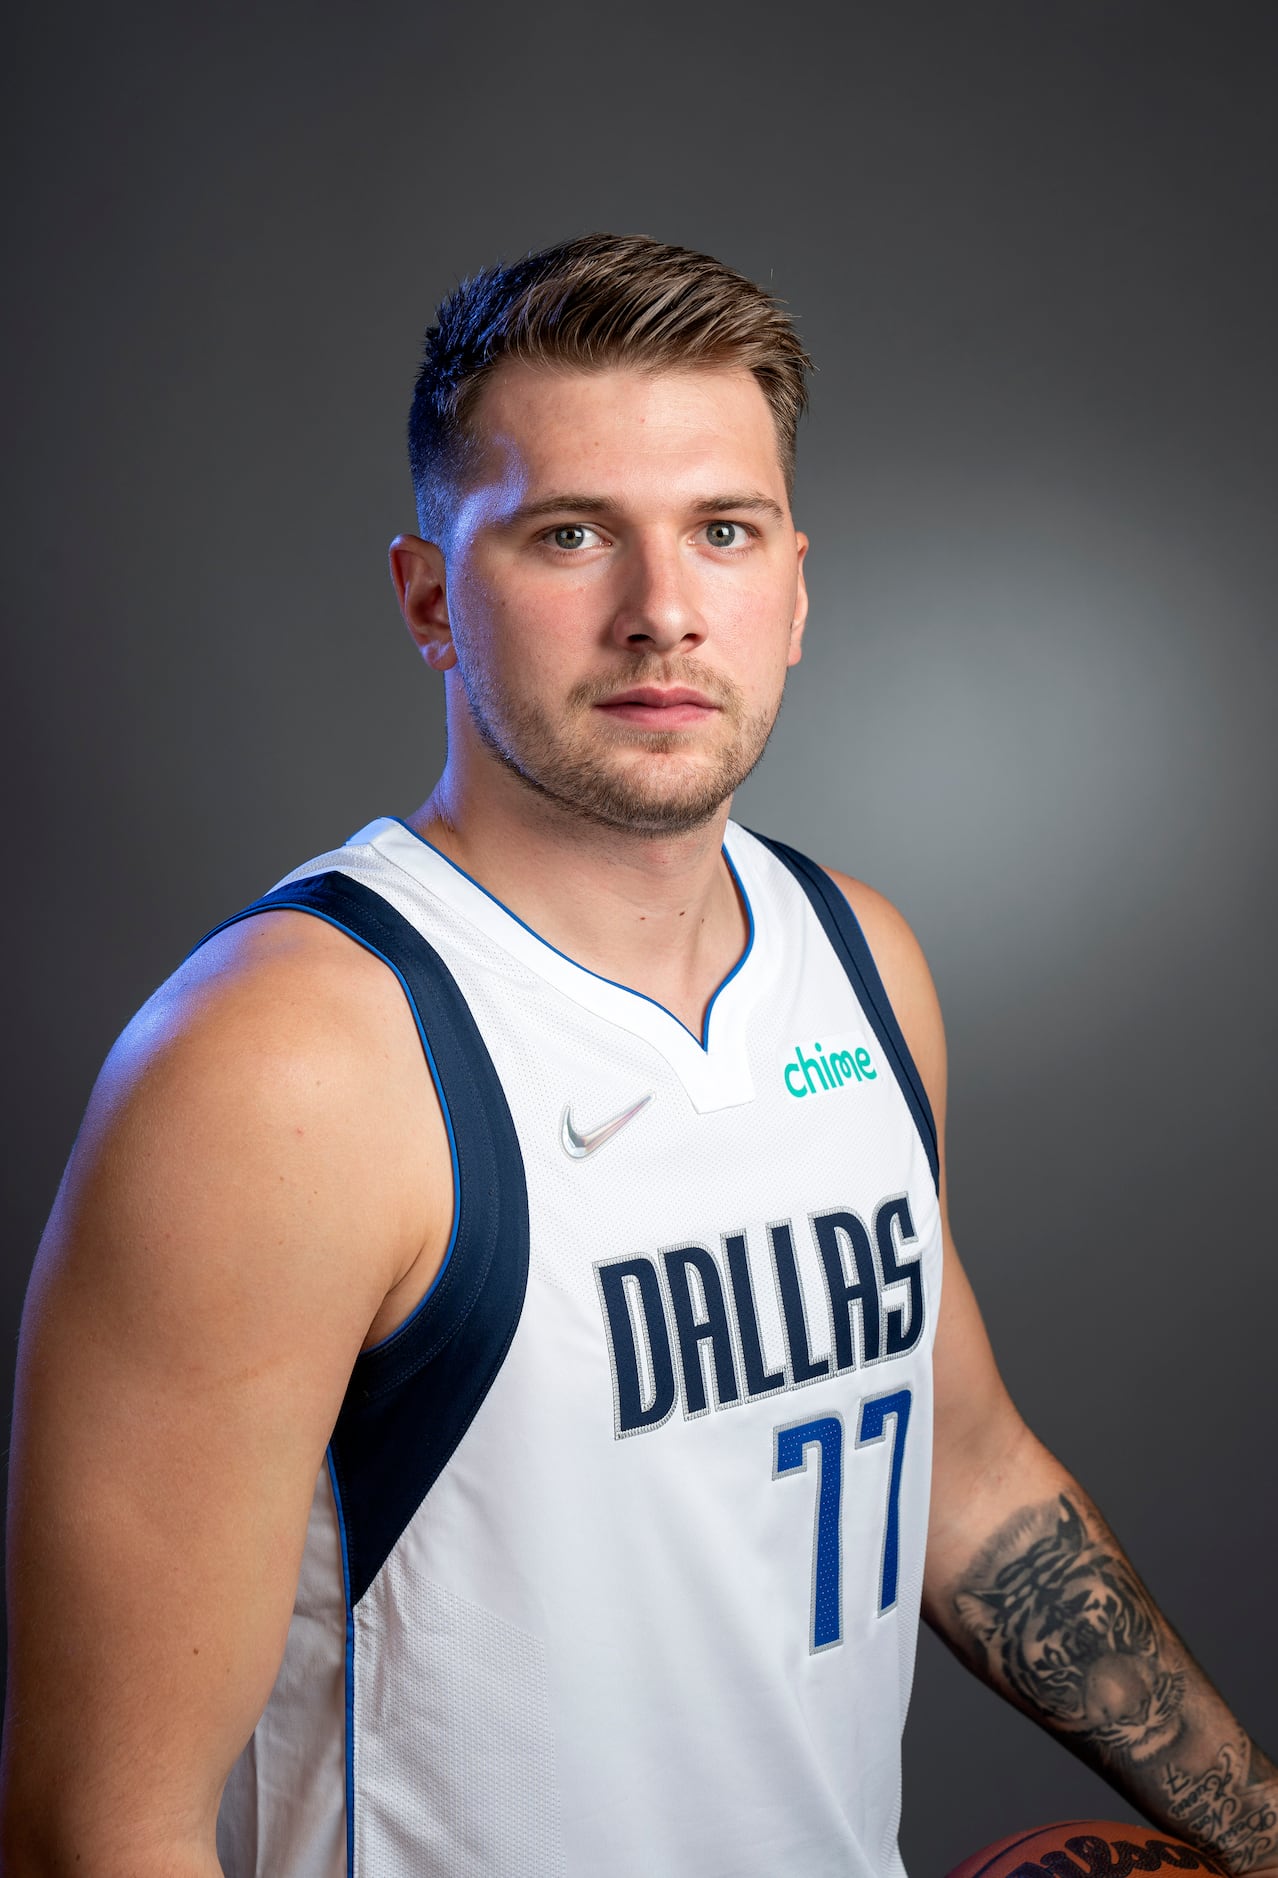 Photos: Strike a pose! Luka Doncic poses for a portrait on Mavs media day